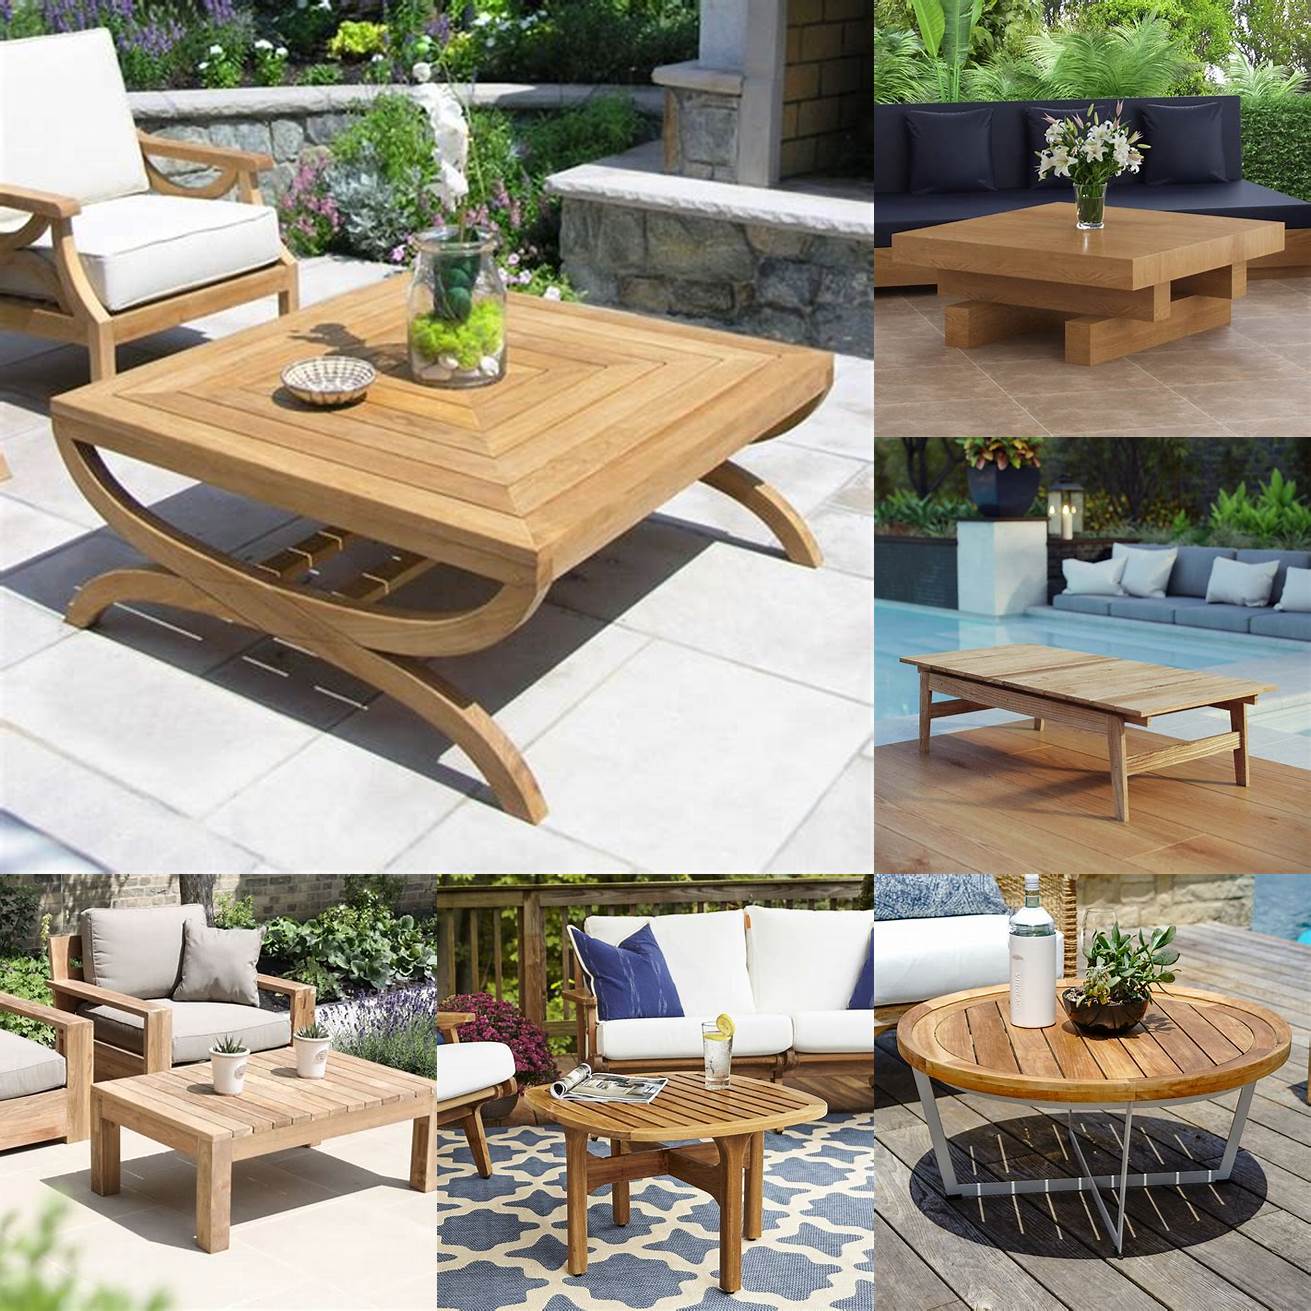 Teak Outdoor Coffee Table with Planters